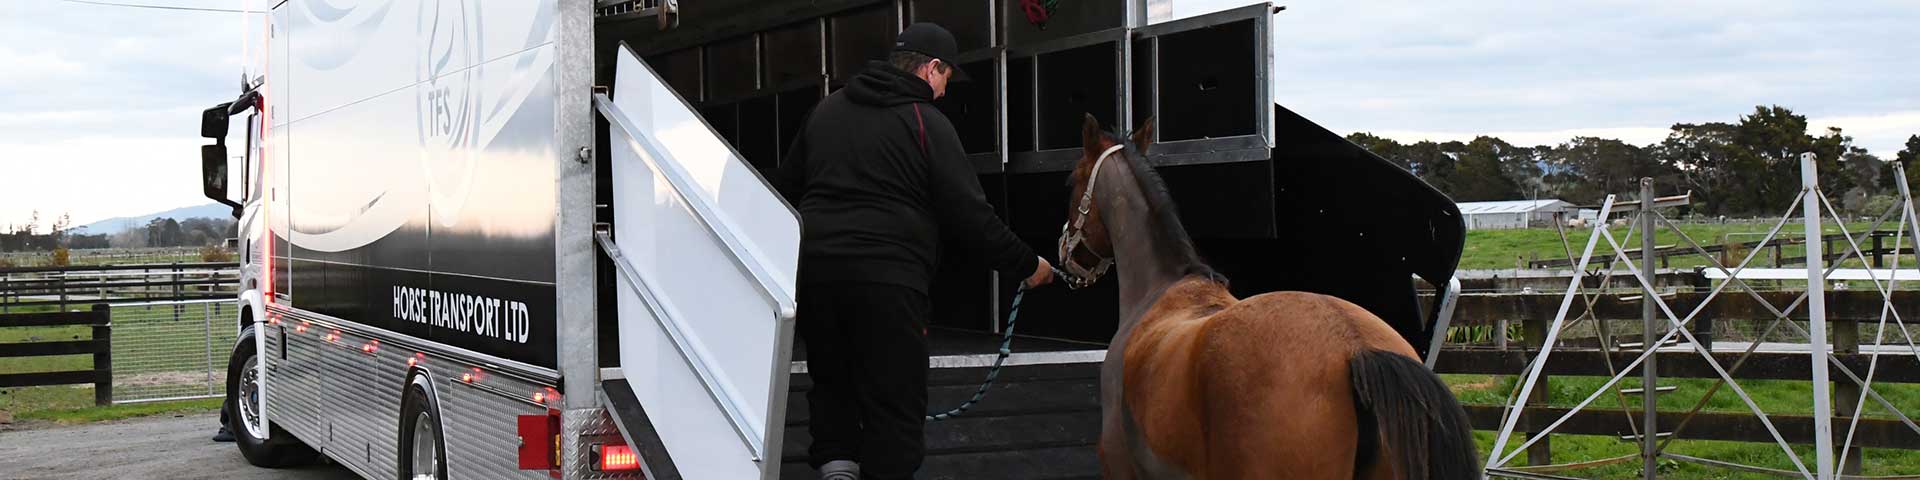 Leading a horse onto the horse transport truck